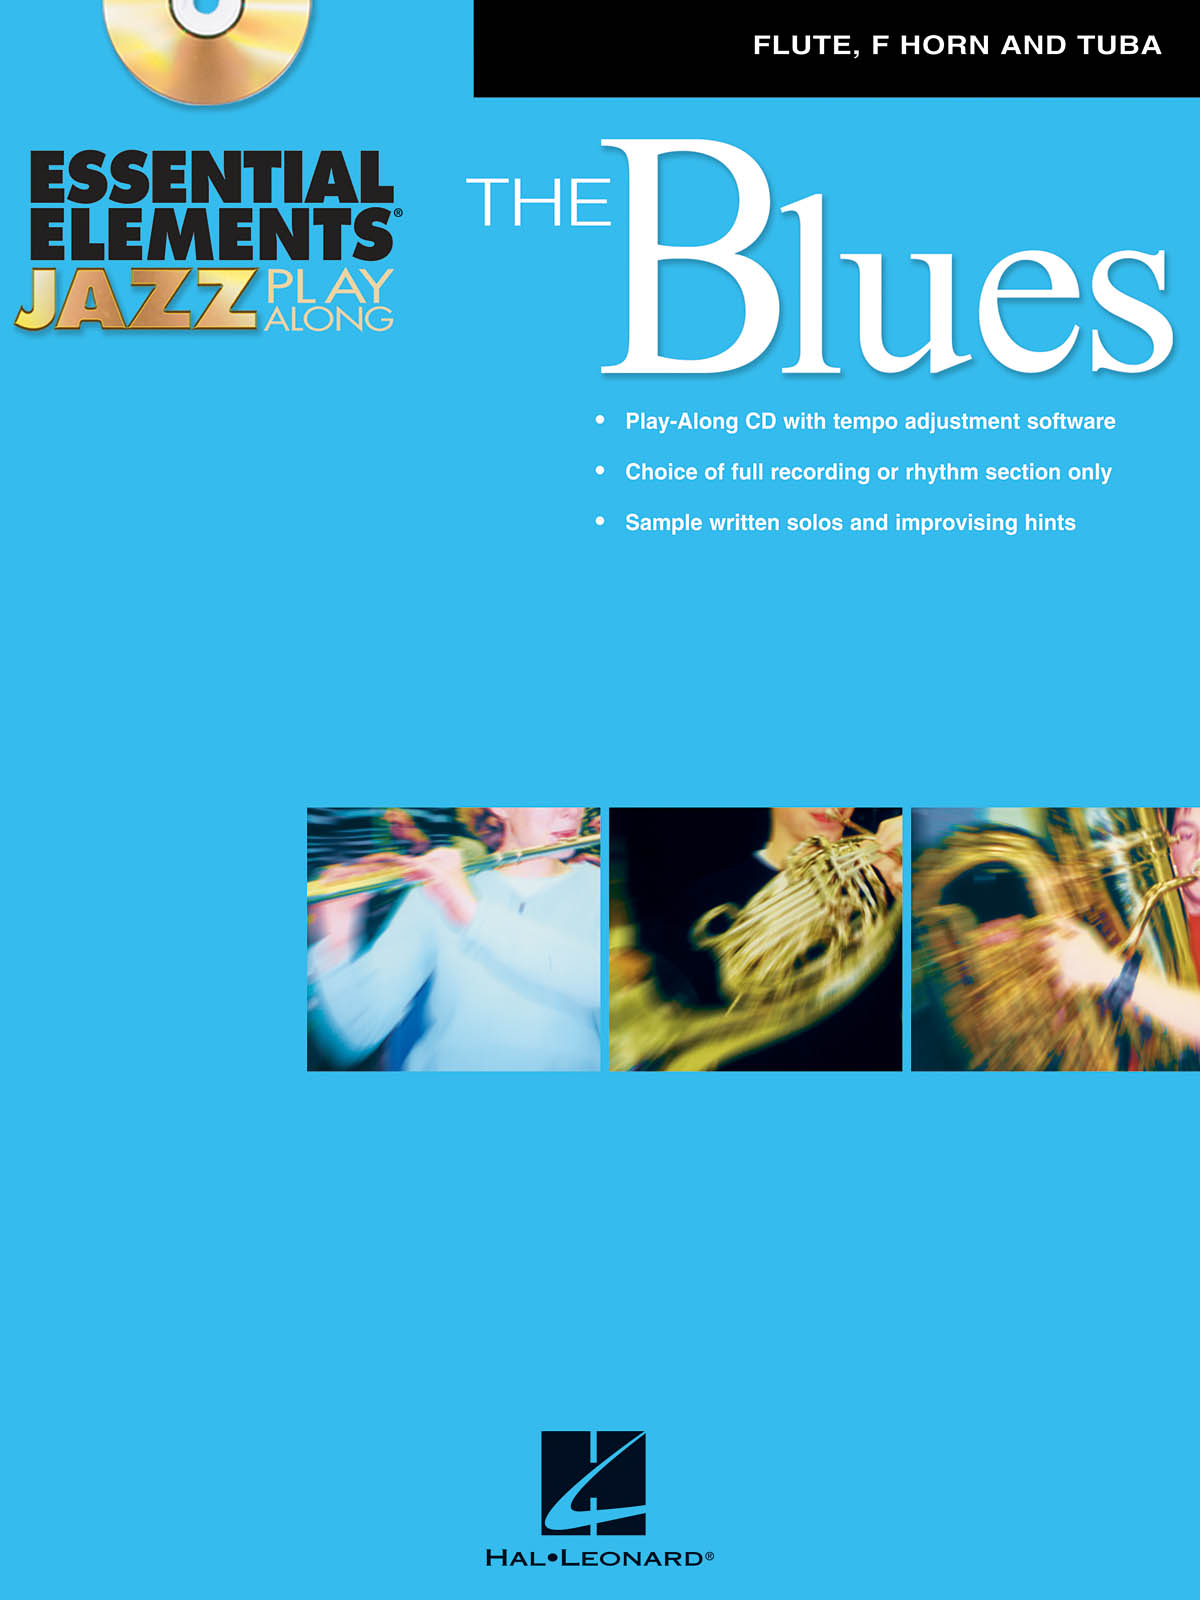 Essential Elements Jazz Play Along – The Blues